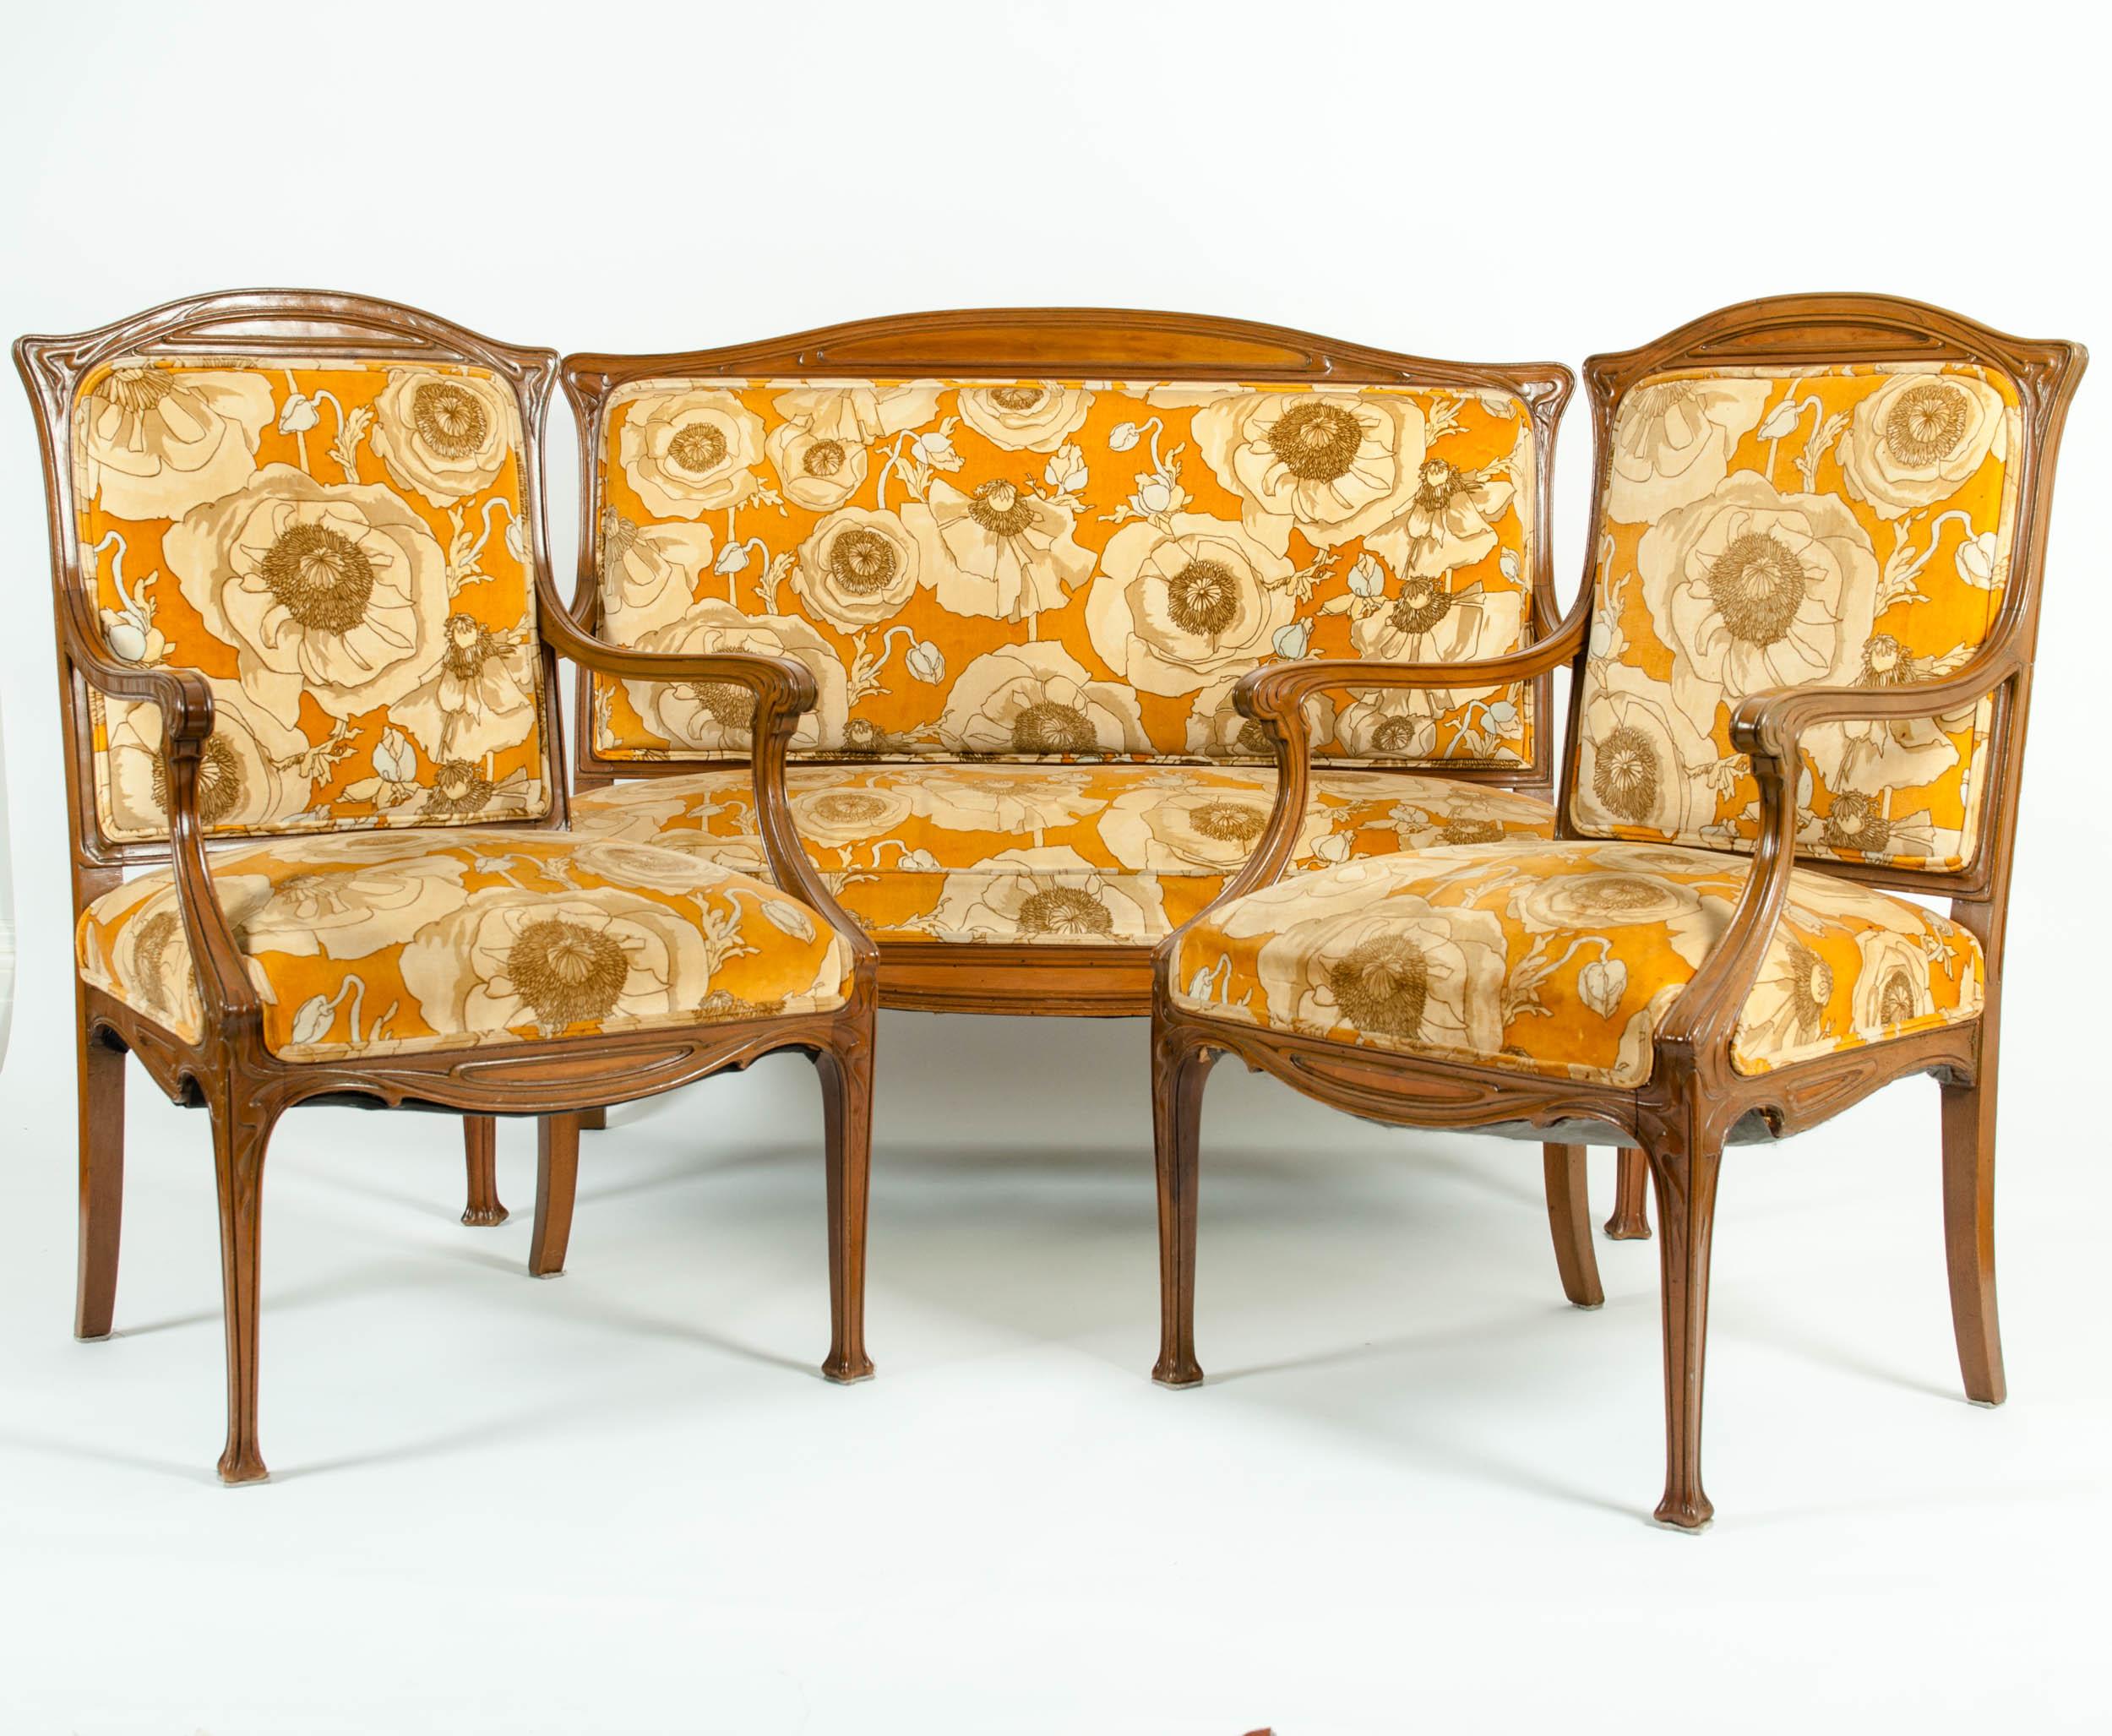 Early 20th century Louis Majorelle three-piece seating set. One settee and two armchairs. Each piece is in great vintage condition with appropriate wear consistent with age / use. Settee measure 50 inches long x 40 inches high x 21 inches wide x 16